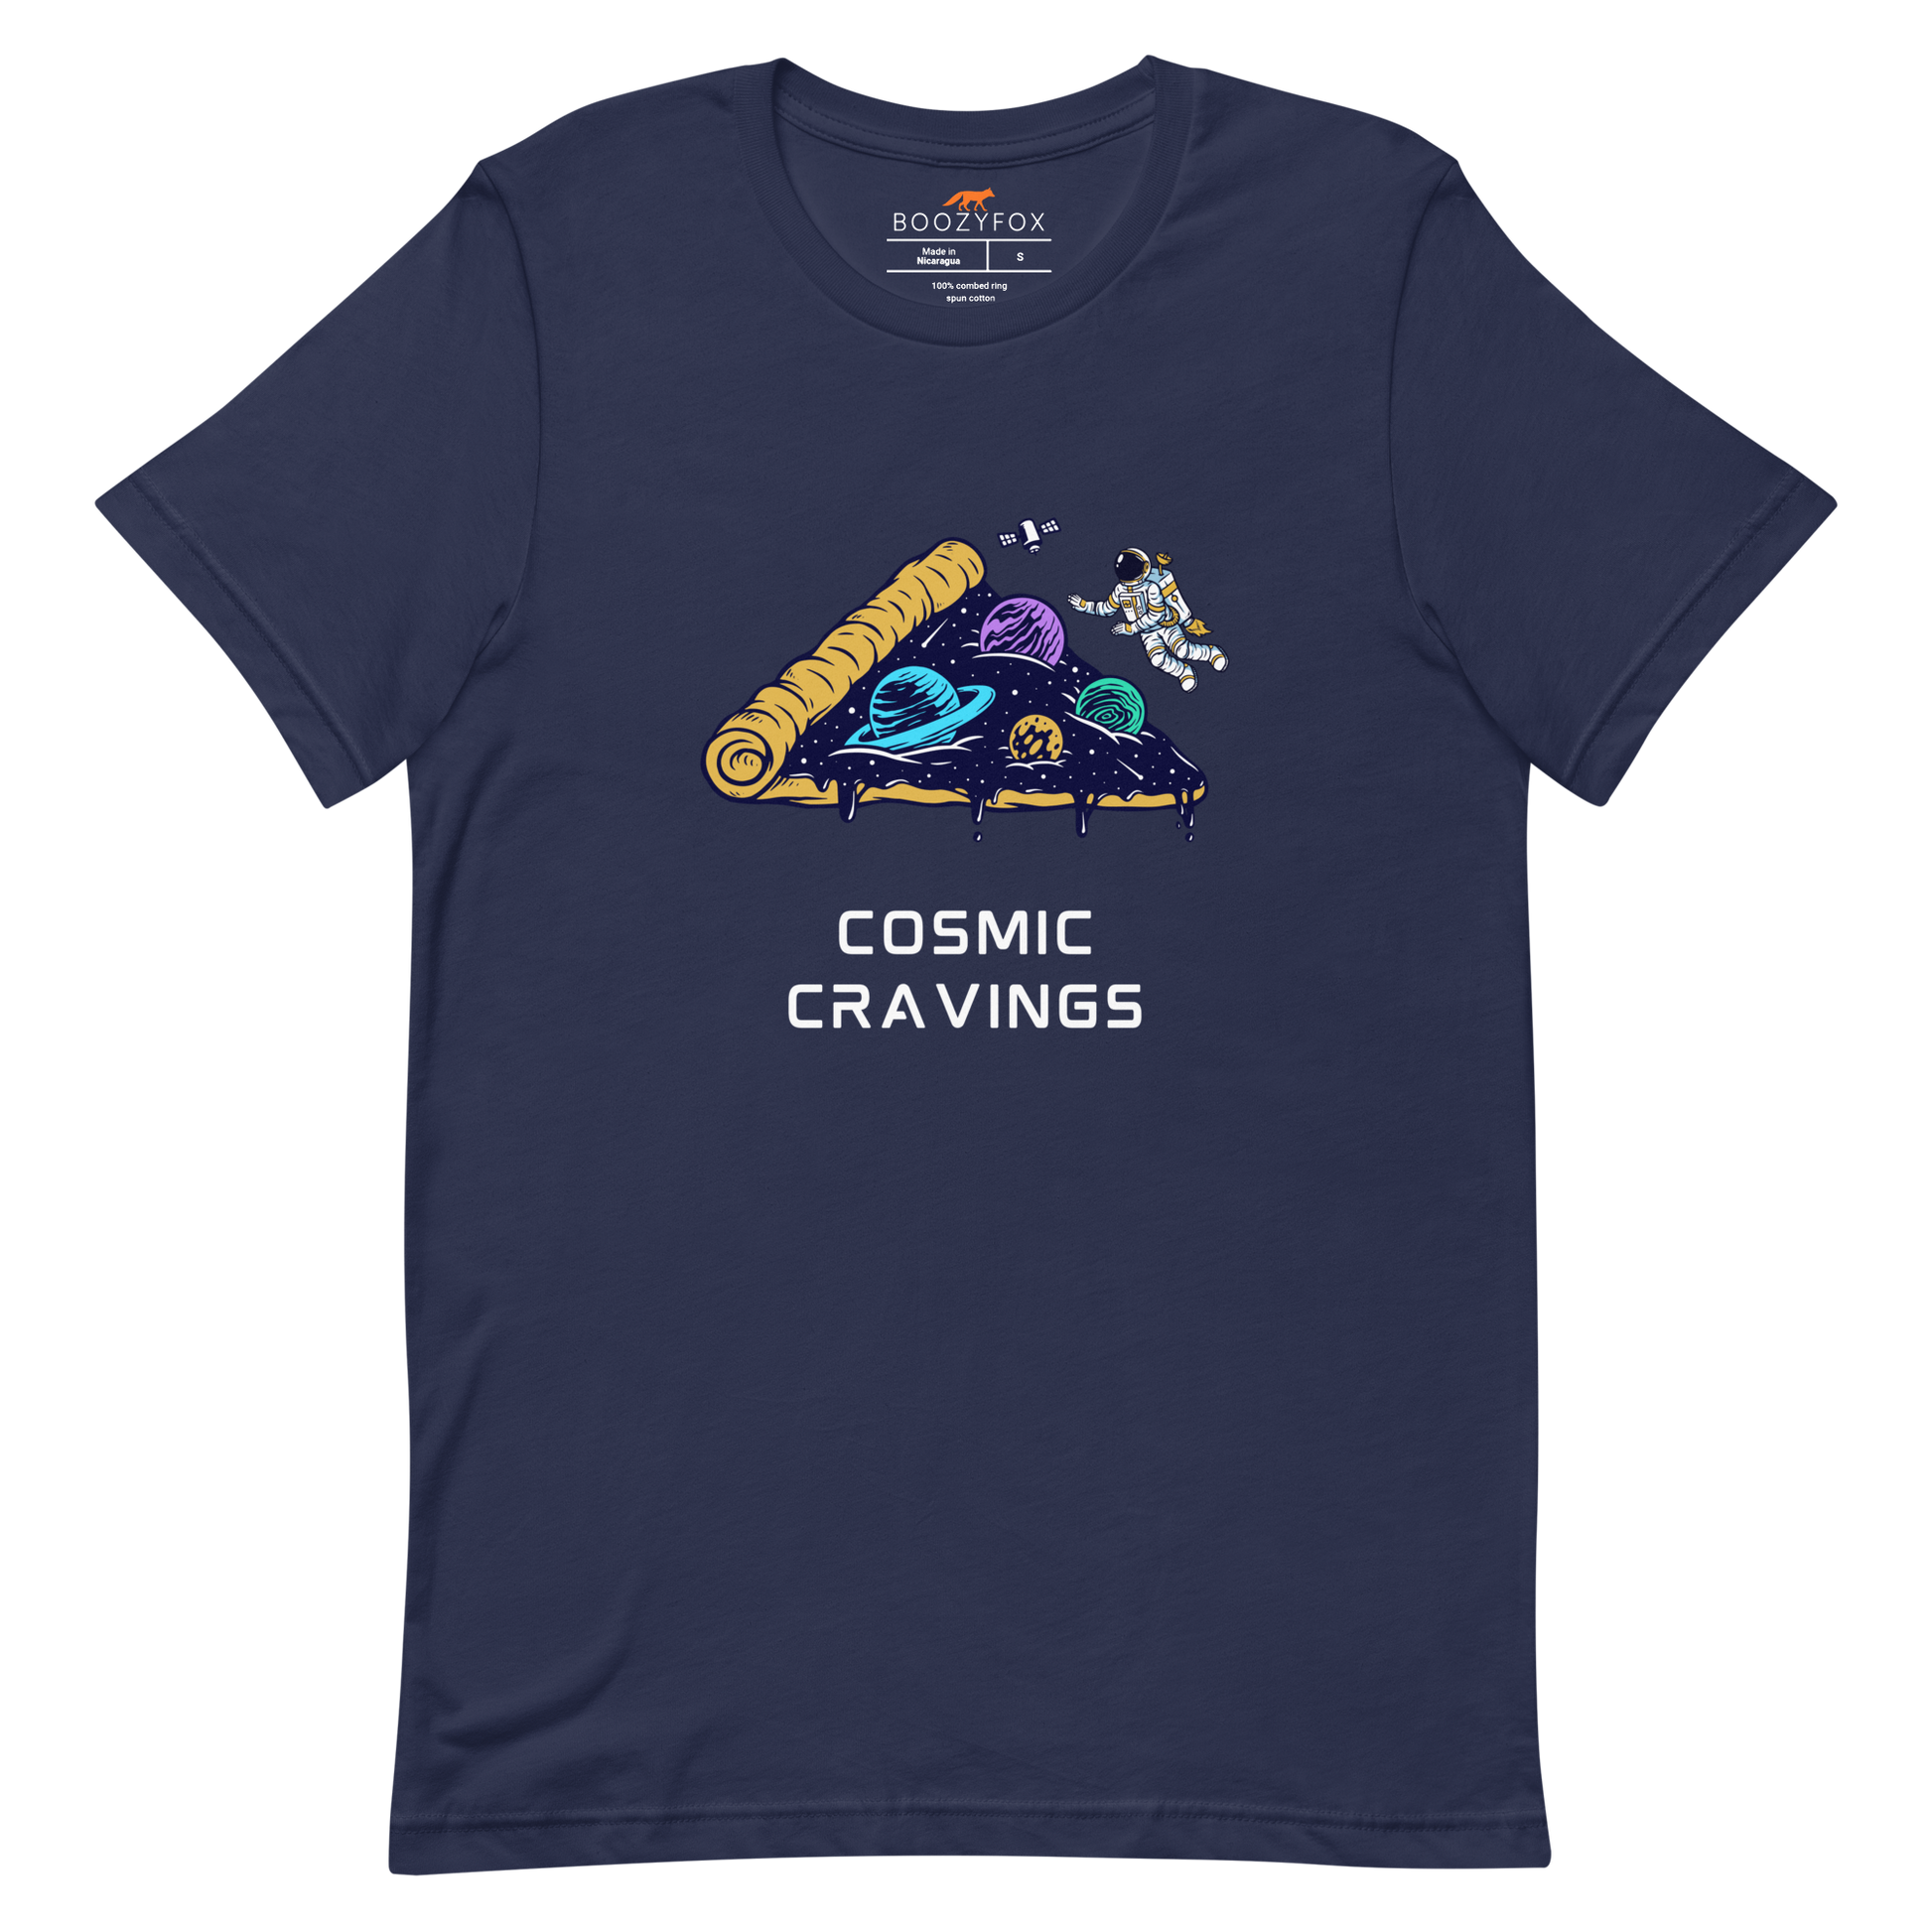 Navy Premium Cosmic Cravings Tee featuring an Astronaut Exploring a Pizza Universe graphic on the chest - Funny Graphic Space Tees - Boozy Fox